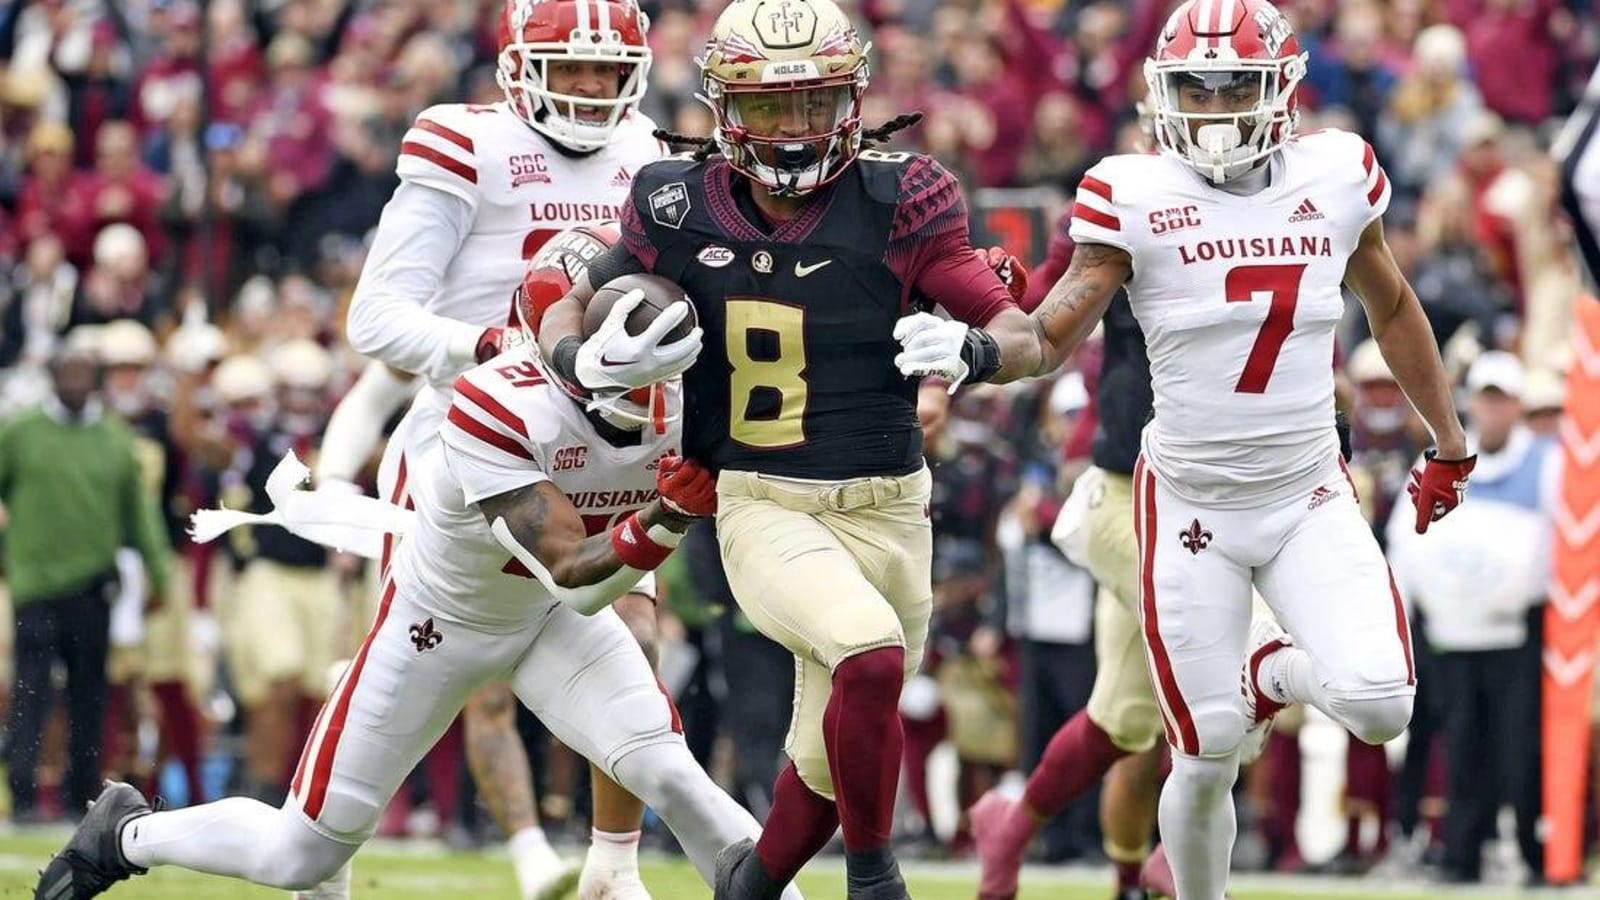 No. 19 Florida State keeps rolling, crushes Louisiana